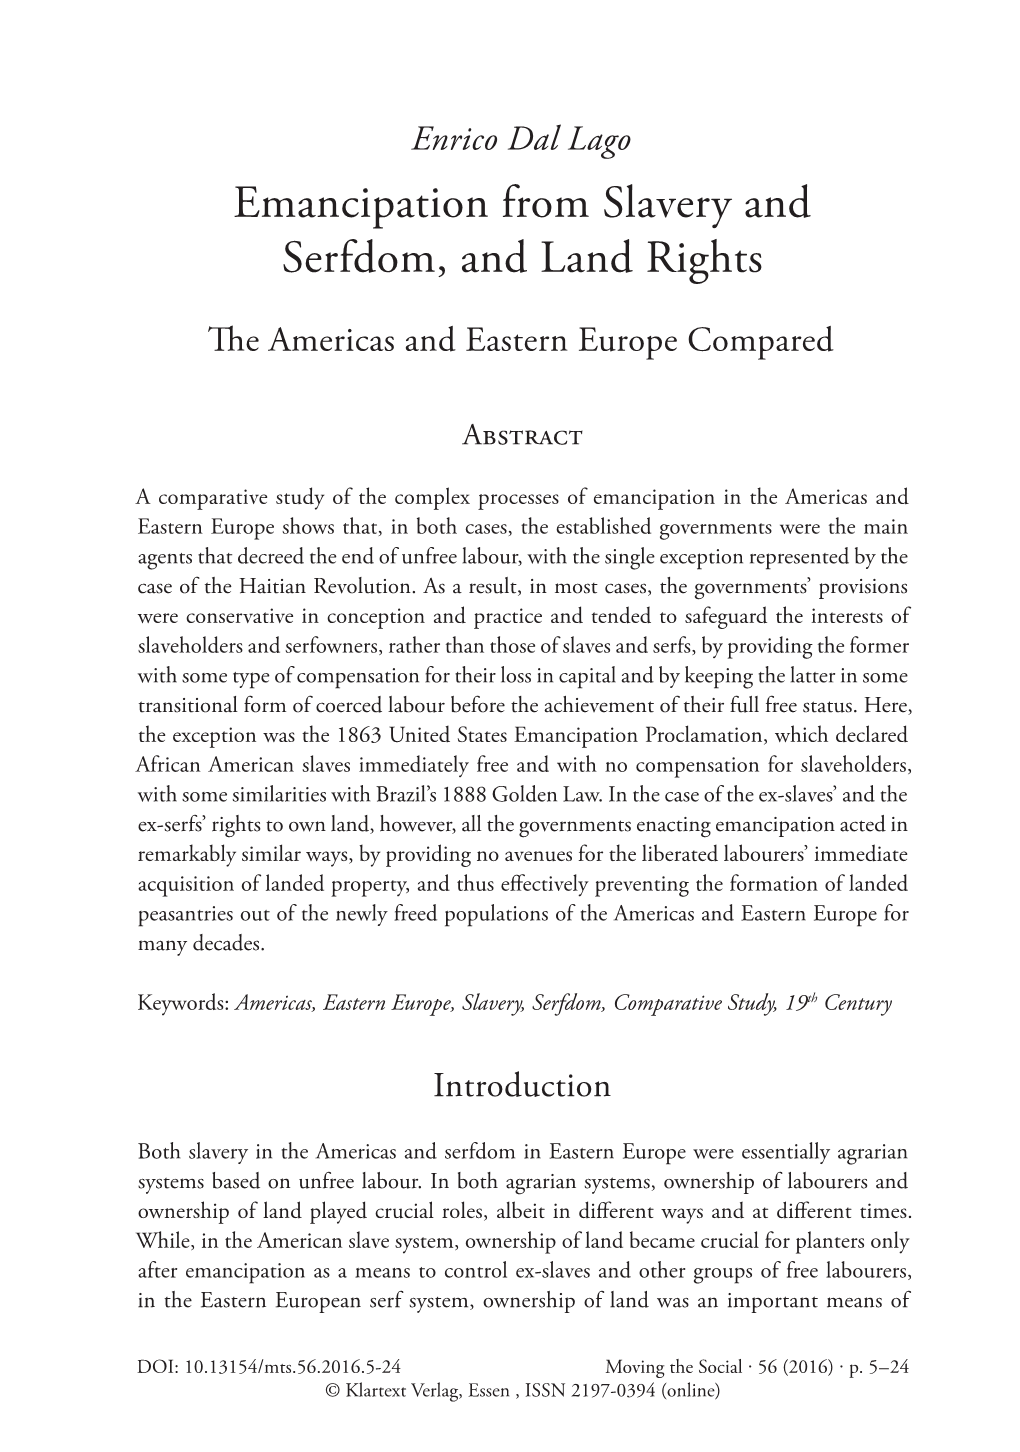 Emancipation from Slavery and Serfdom, and Land Rights